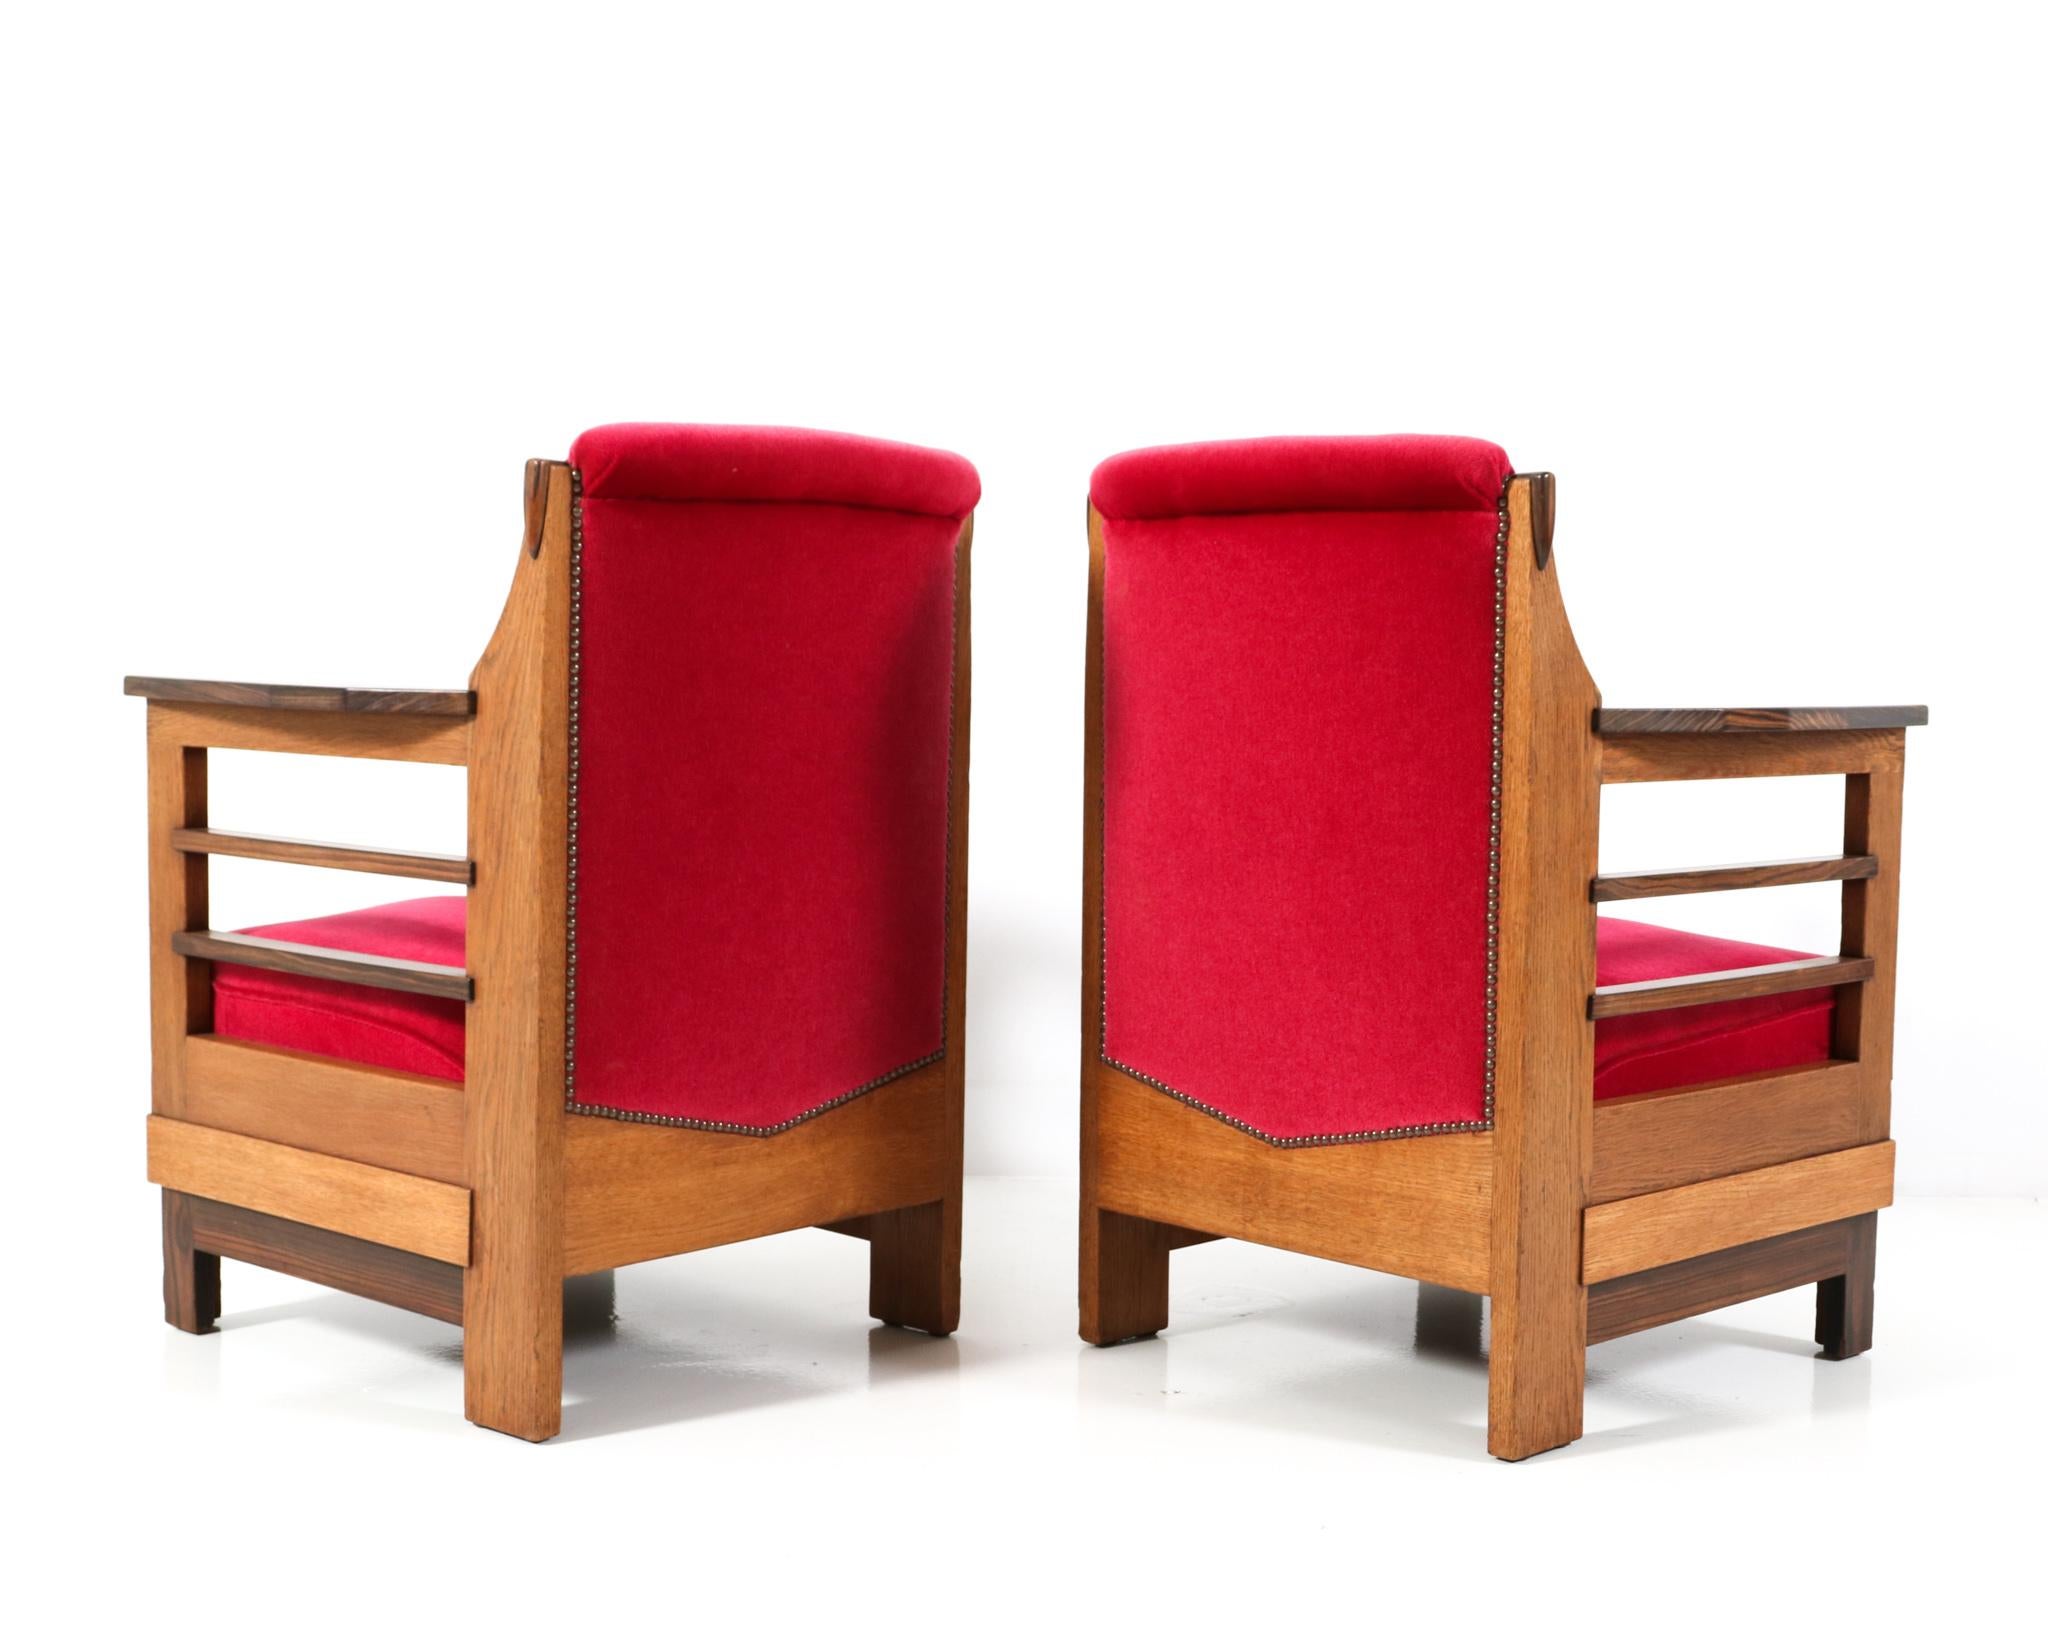 Pair of Art Deco Amsterdamse School Lounge Chairs by Anton Lucas Leiden, 1920s For Sale 1